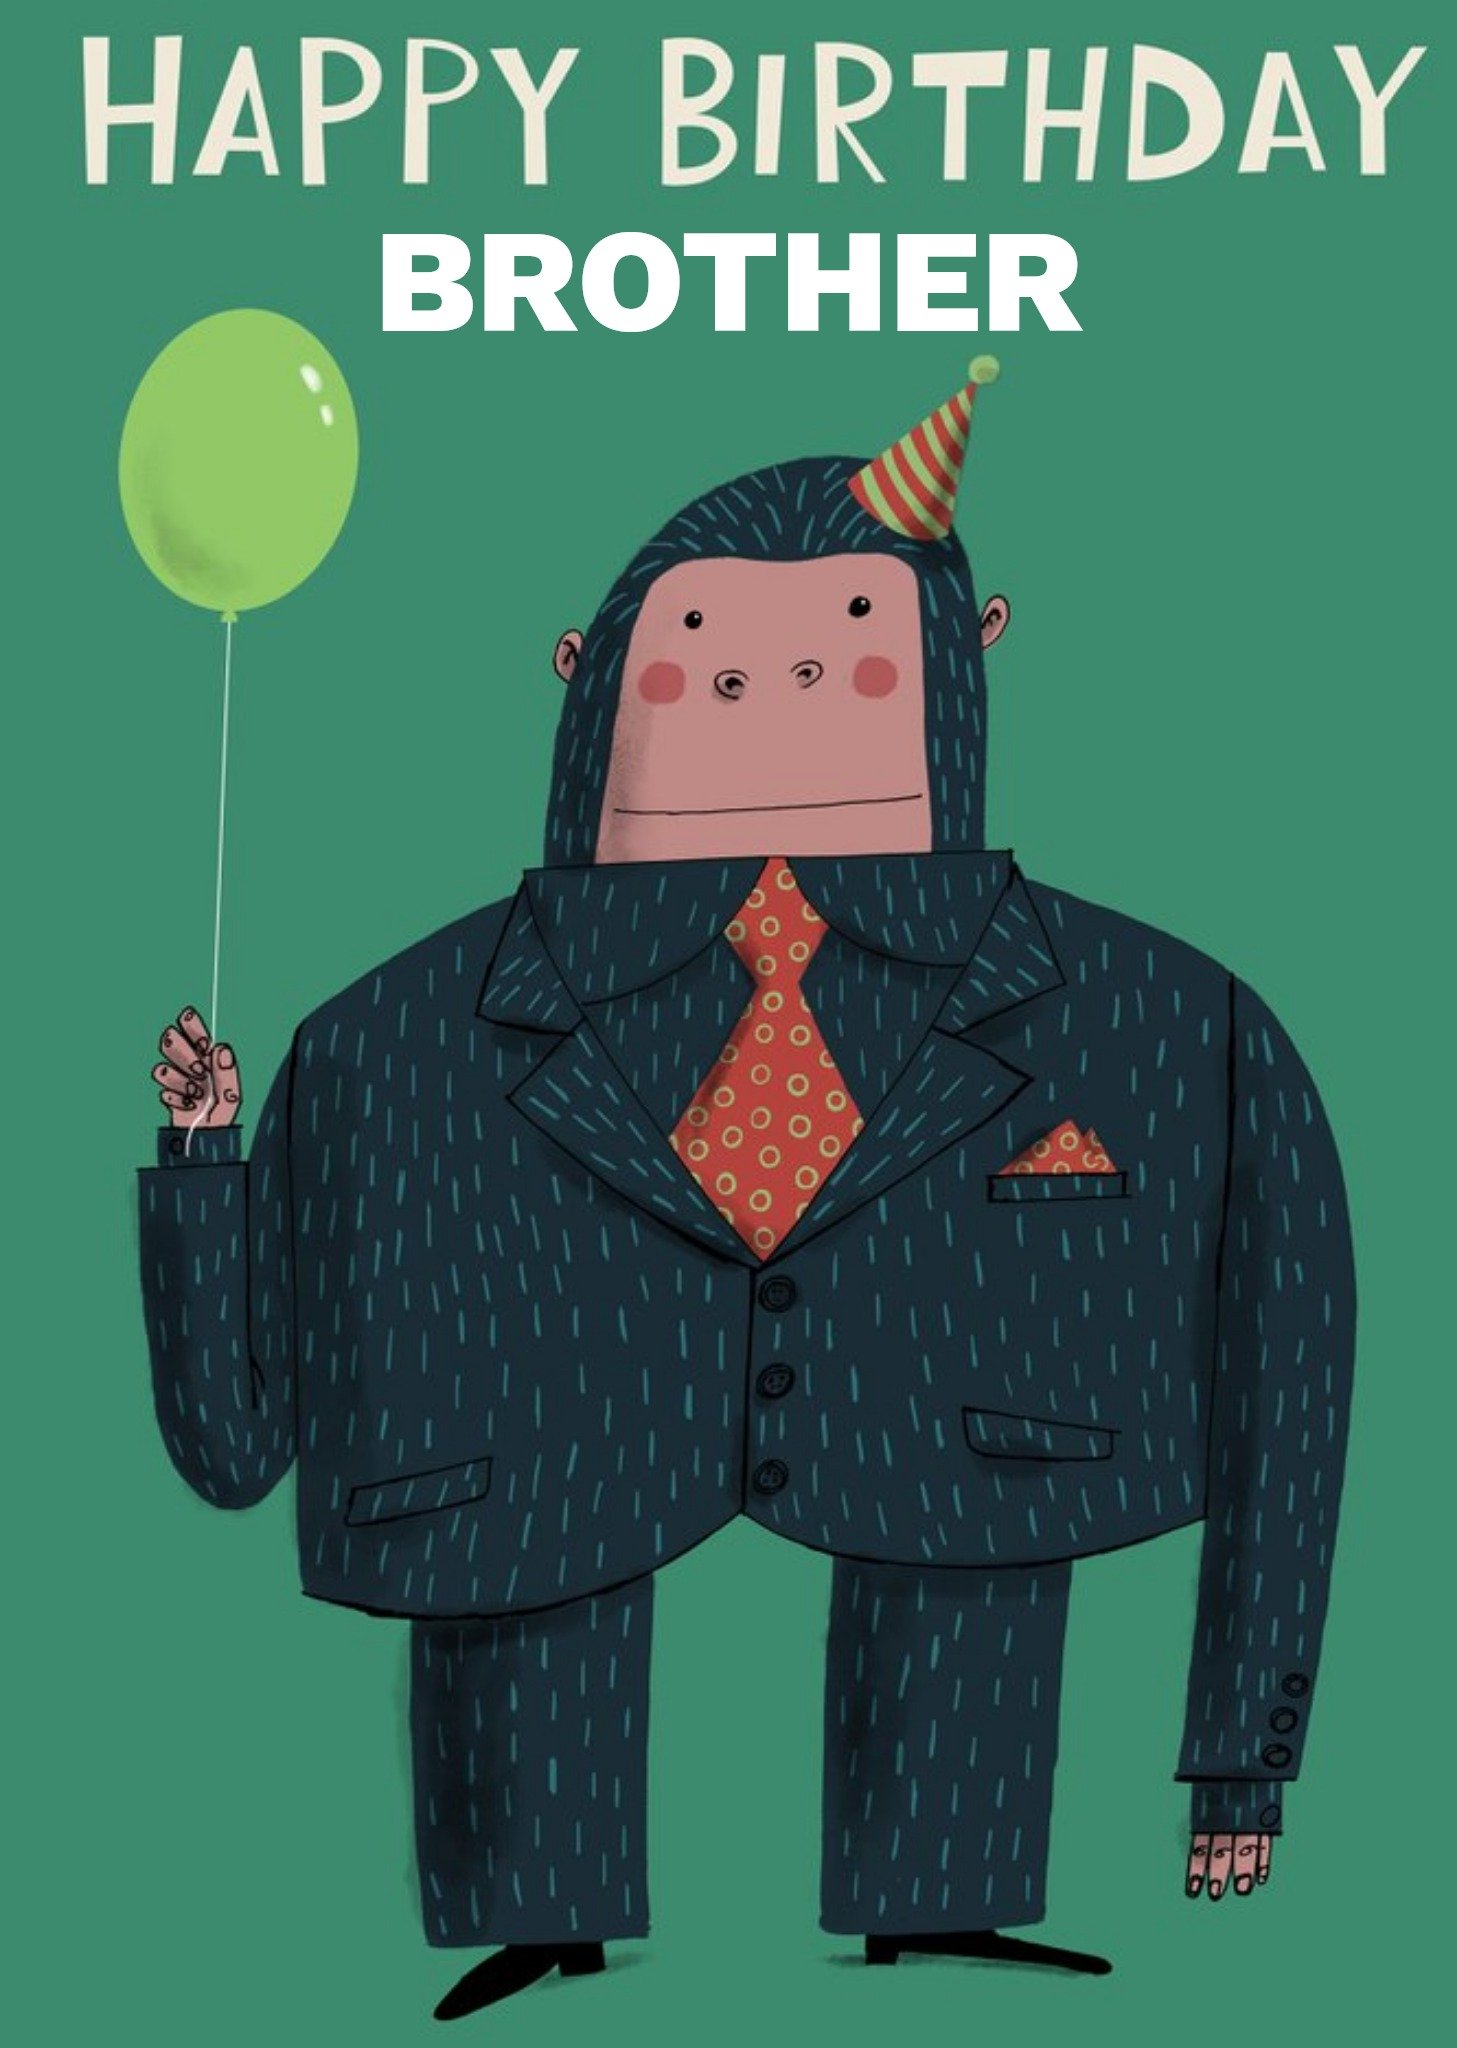 Moonpig Gorilla In A Suit Holding A Balloon Personalise Brother Birthday Card Ecard